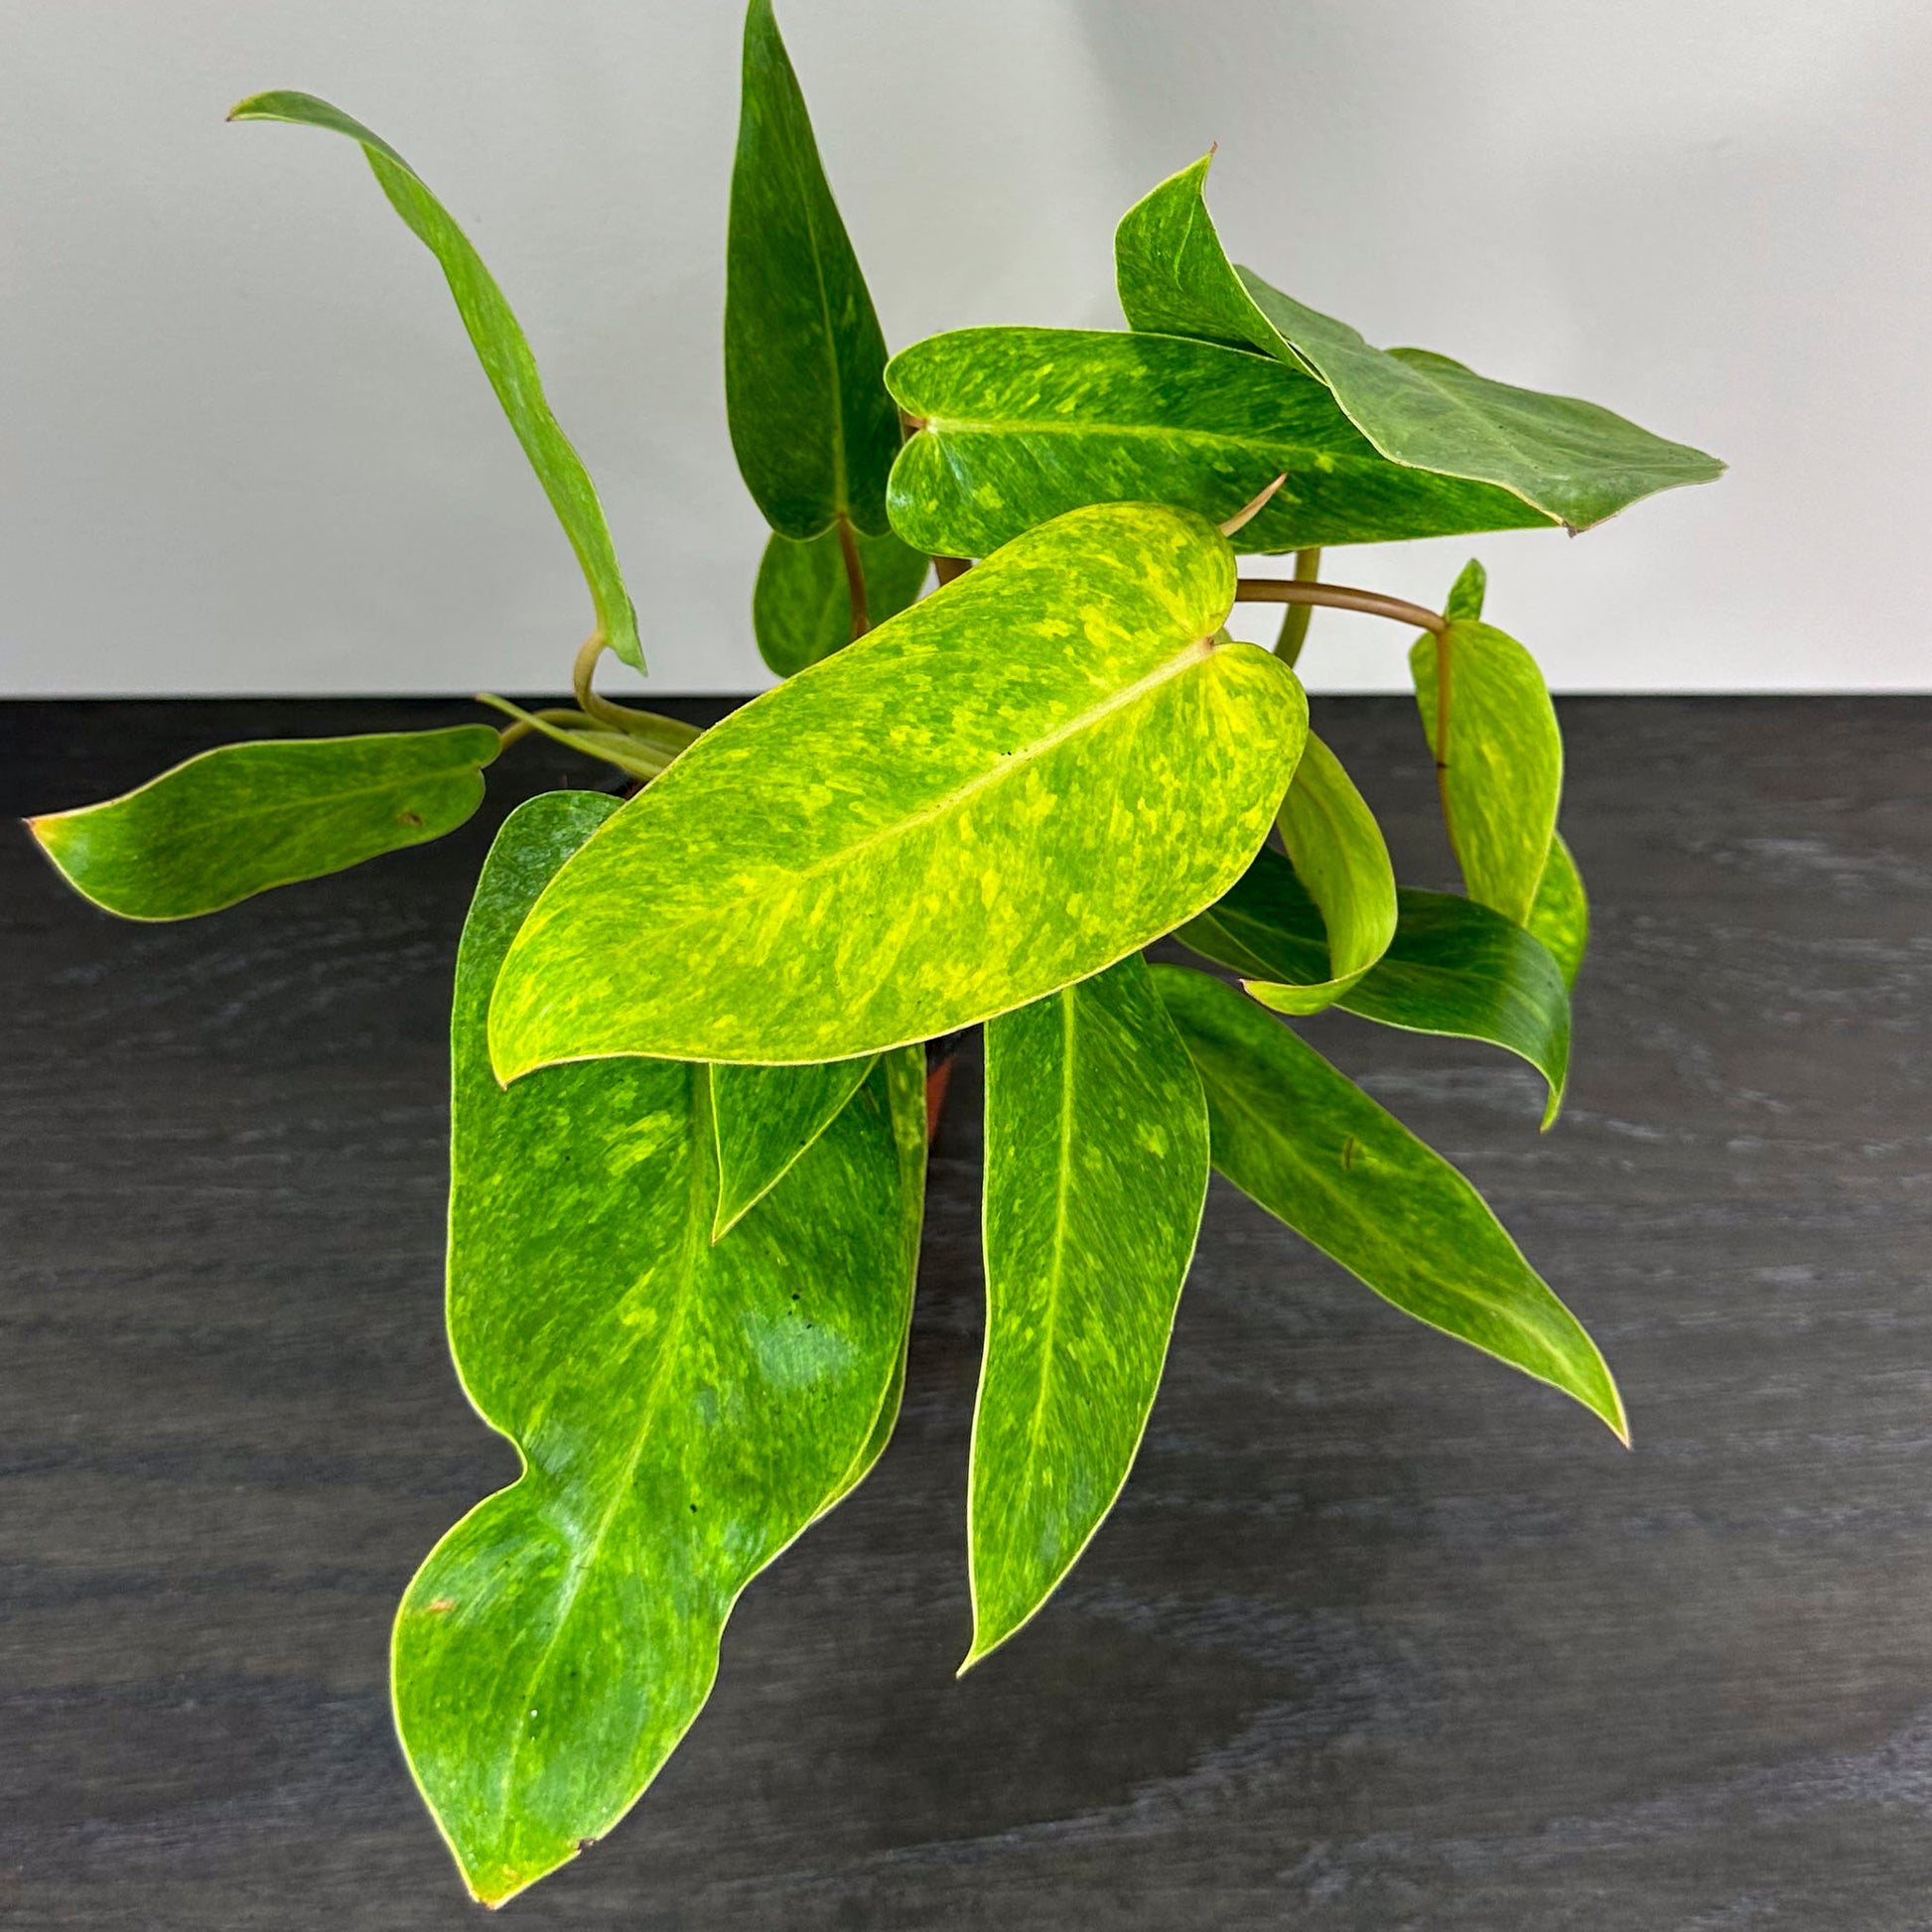 Philodendron 'Painted Lady' - A captivating indoor plant with uniquely patterned leaves.